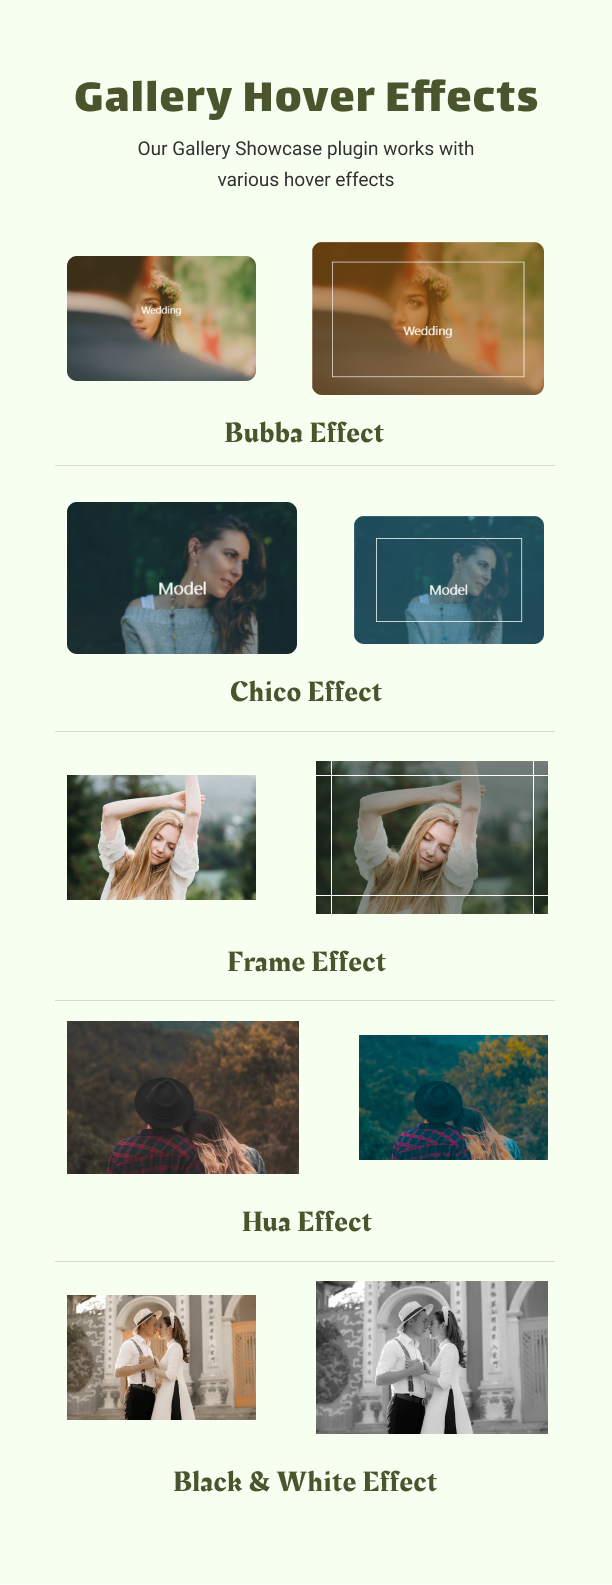 Gallery Hover Effects - Gallery Showcase Pro for WordPress